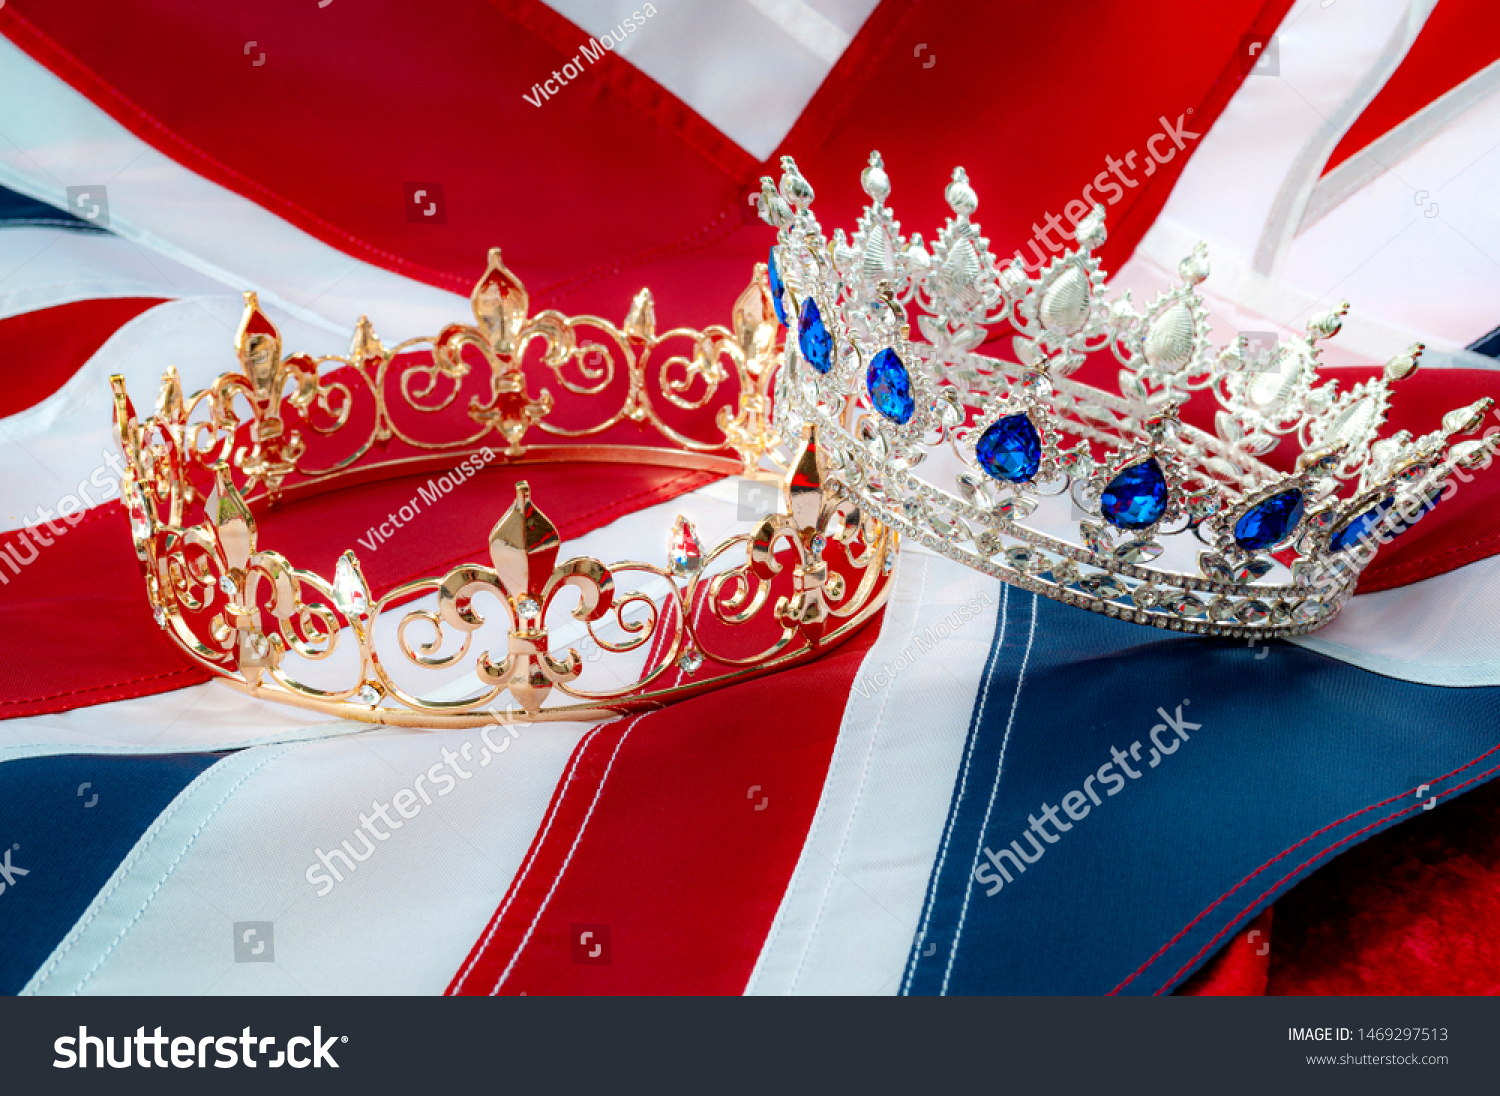 British royals, royal coronation and monarchy concept theme with a gold king crown and a silver queen tiara with the UK flag called the union jack in the background #1469297513